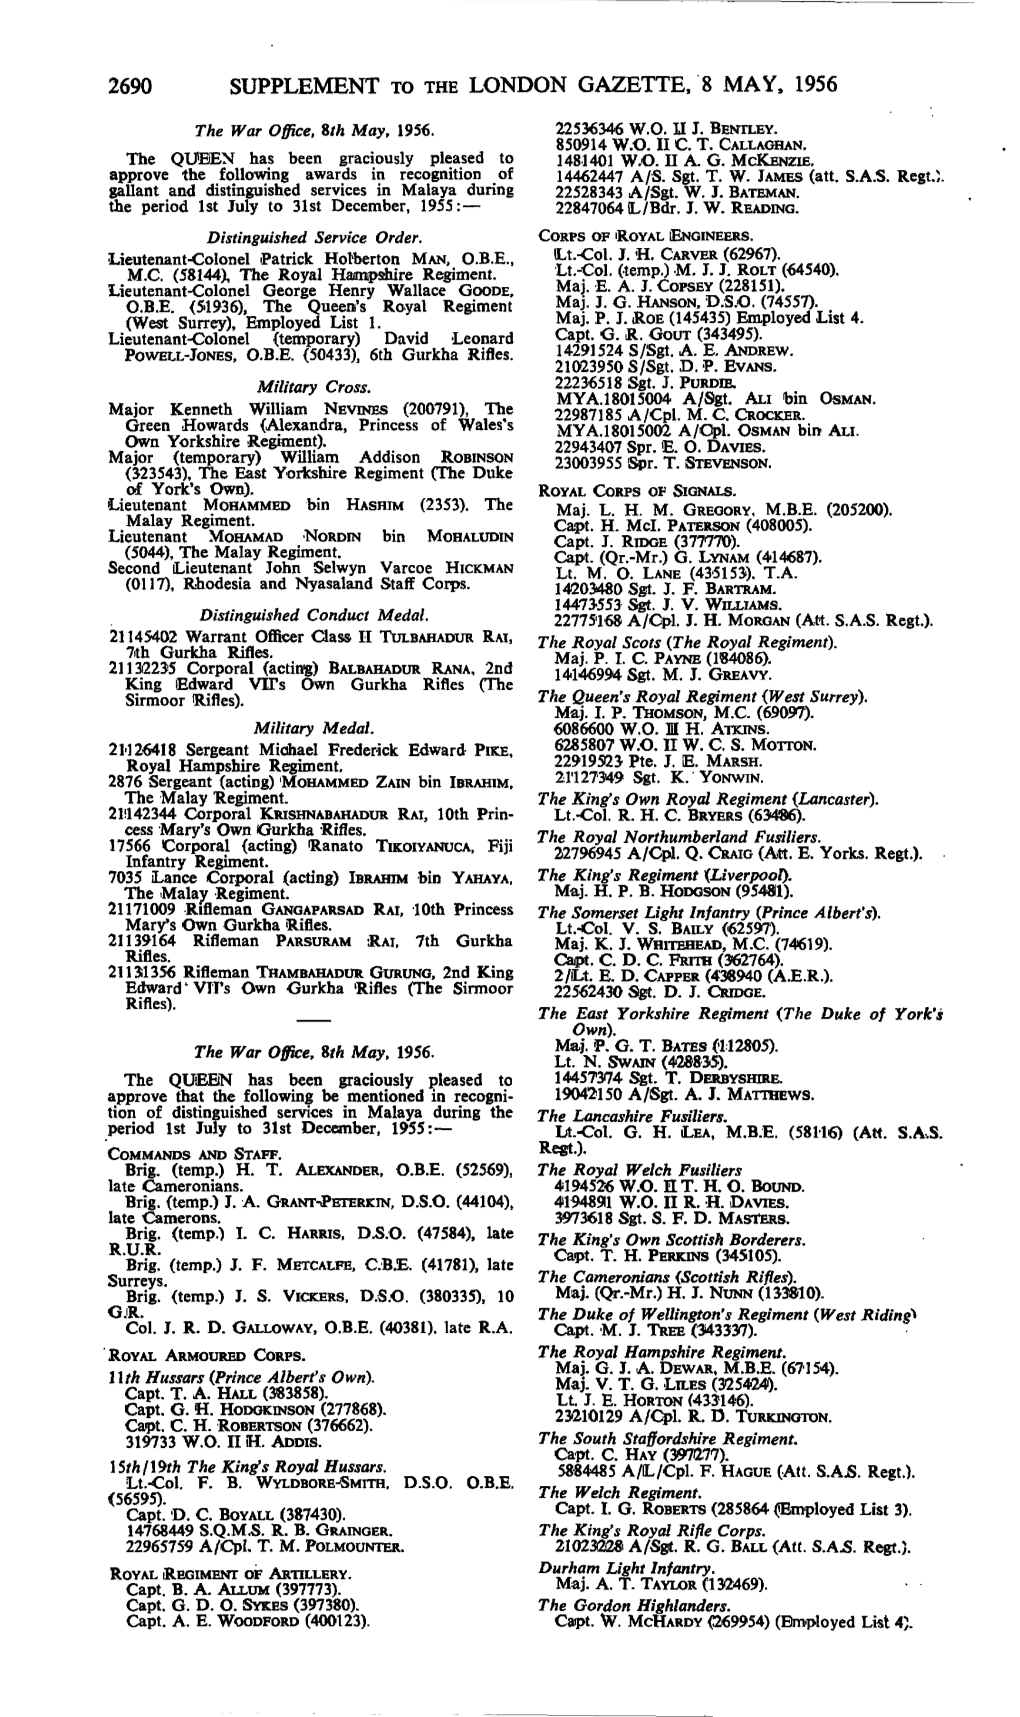 2690 Supplement to the London Gazette, 8 May, 1956